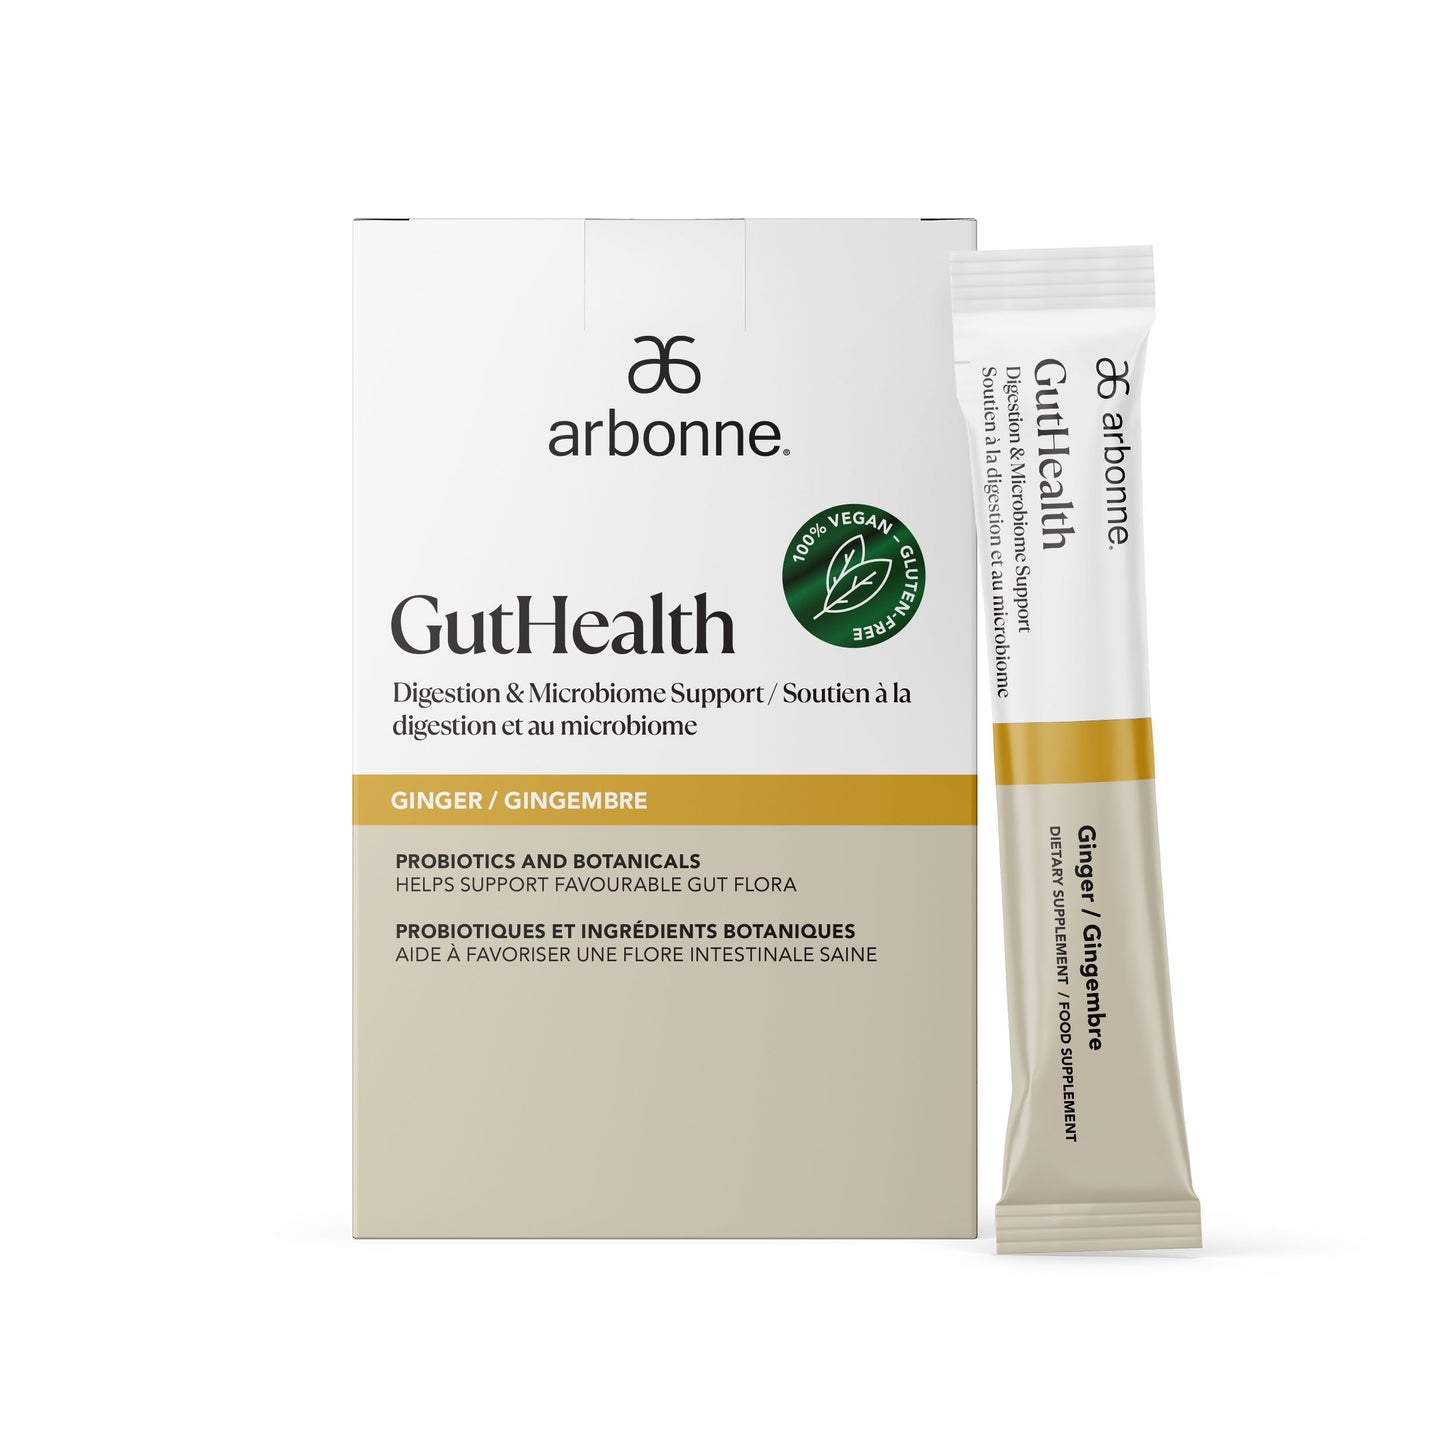 MindBodySkin Arbonne GutHealth Digestion and Microbiome Support with Ginger, containing probiotics and botanicals.